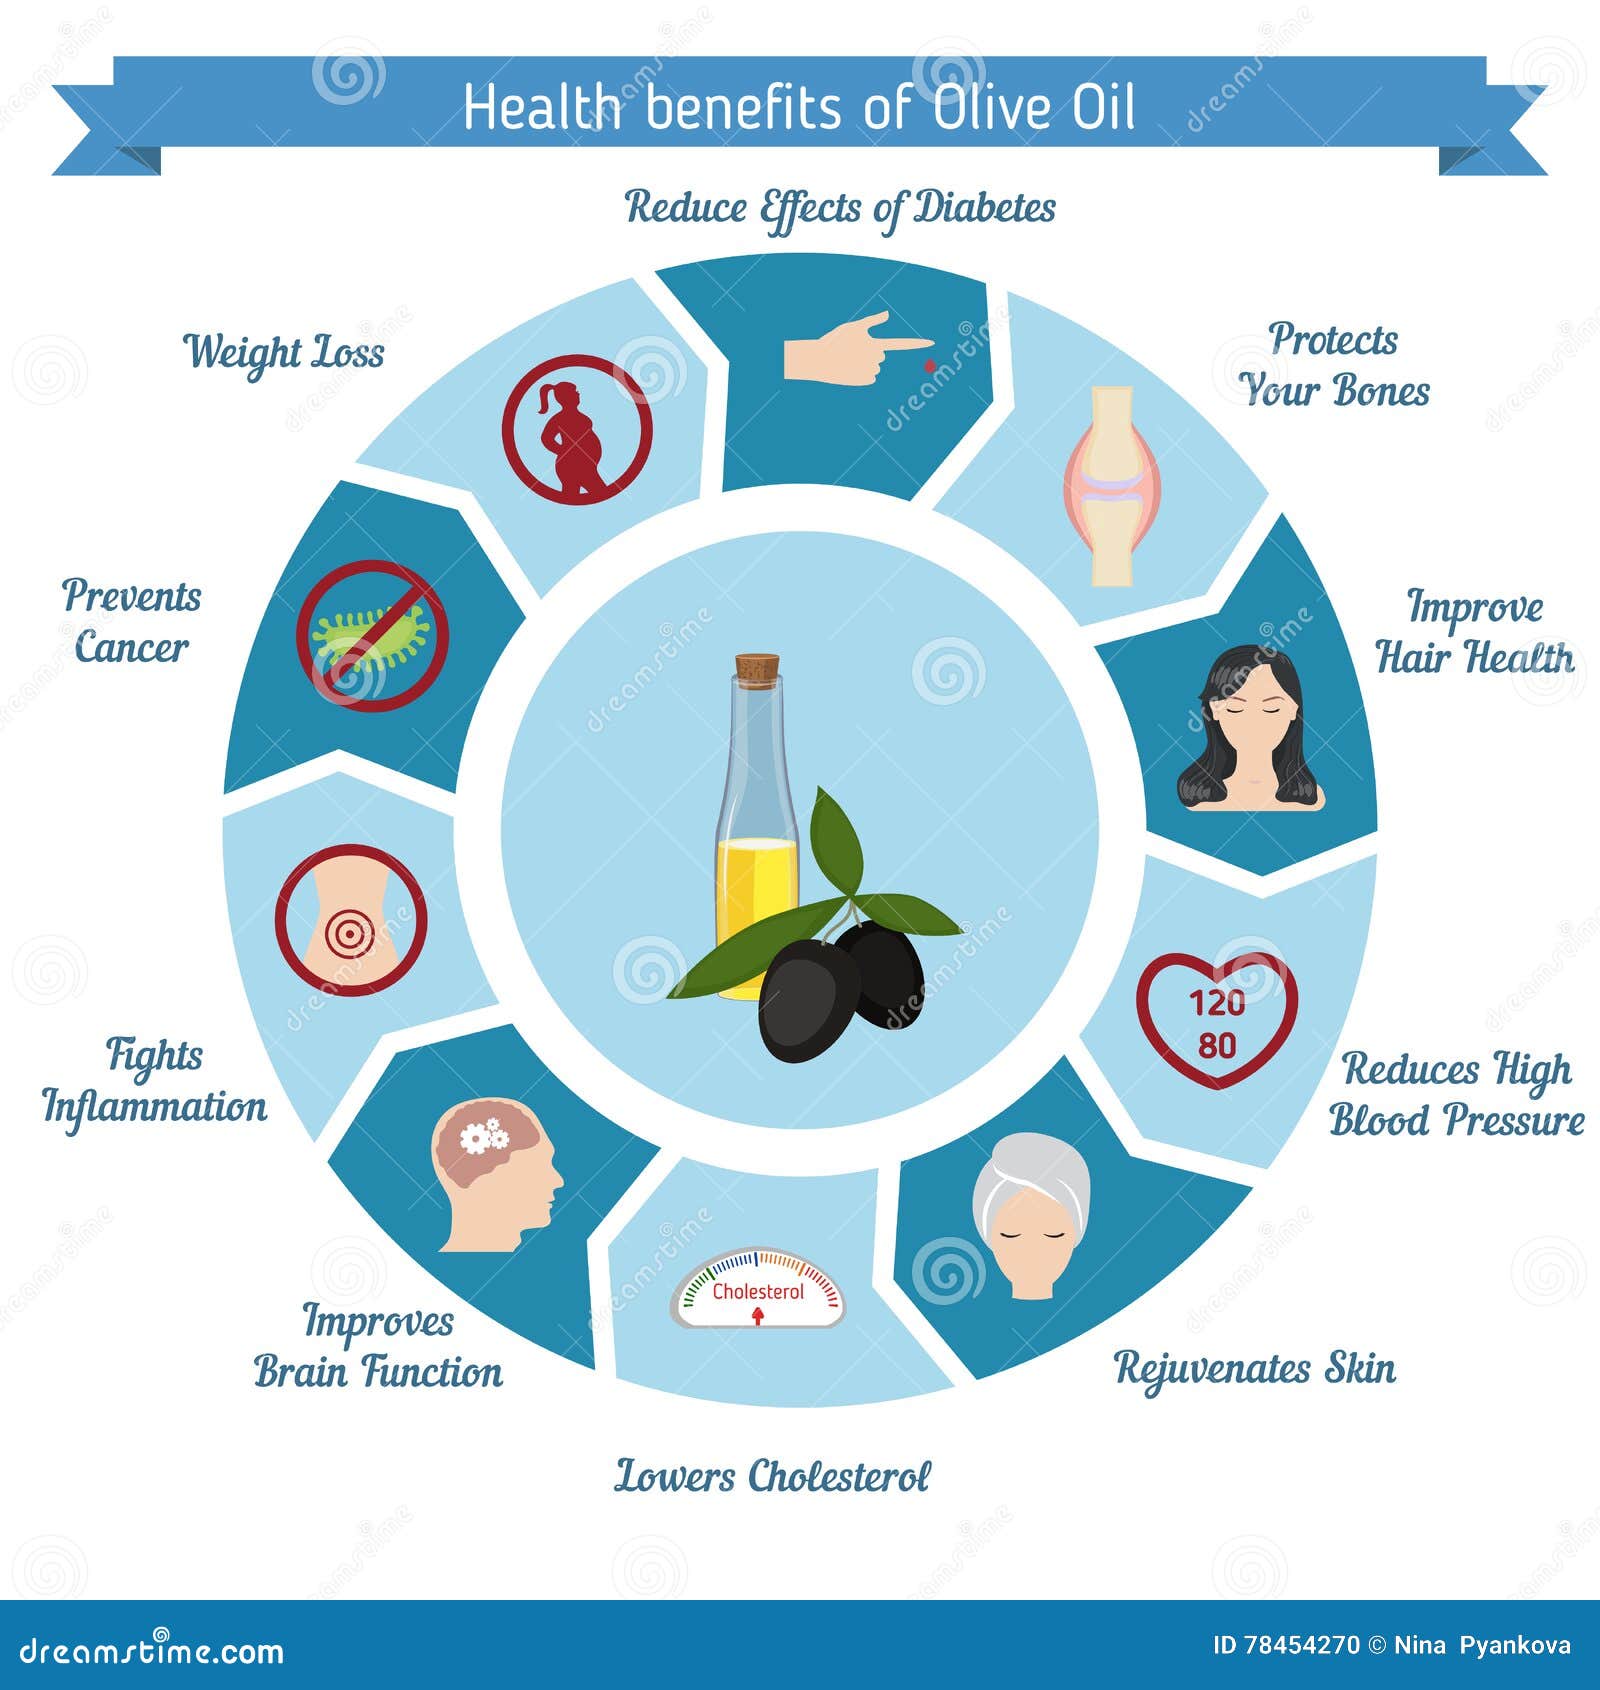 An update on the health benefits of olive oil